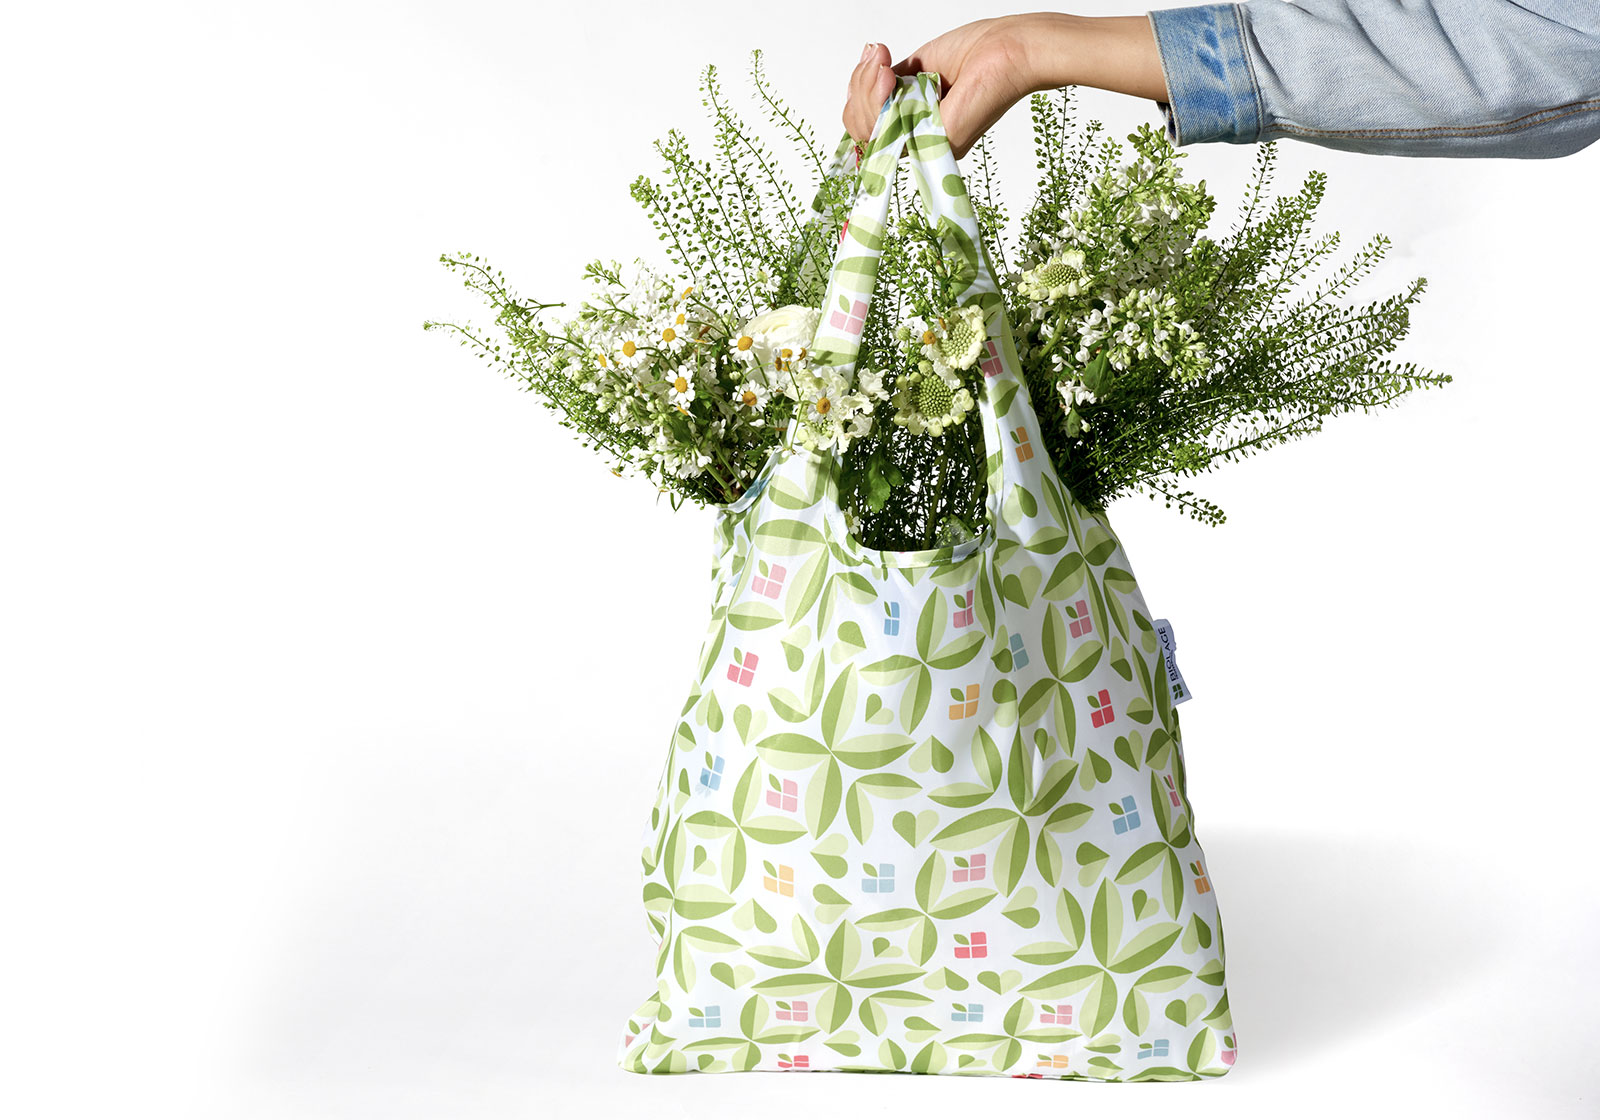 Biolage Earth Day tote bag made of recycled bottles